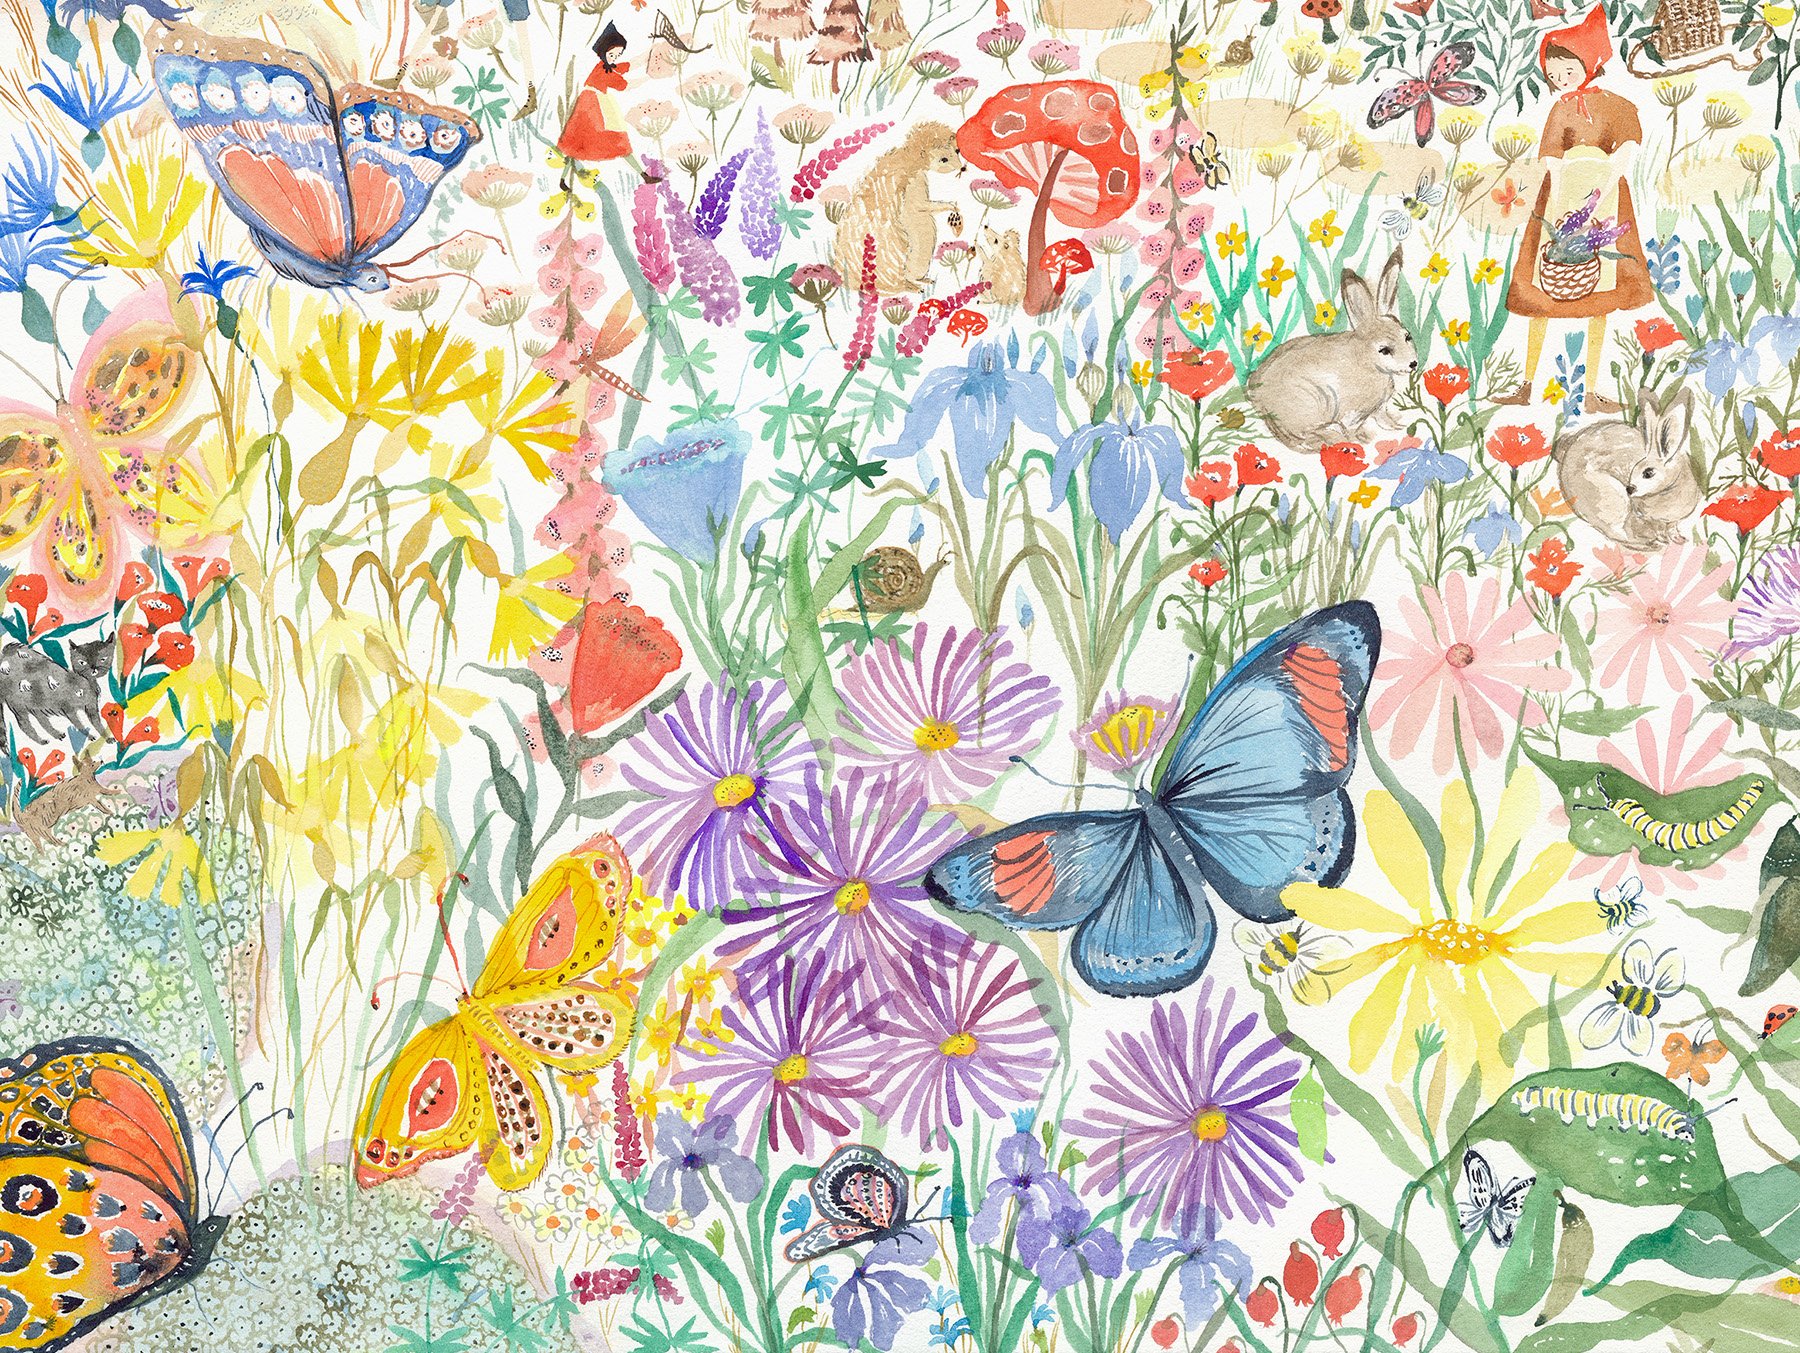   Butterfly Garden, detail   Watercolor on paper, 2023  22” x 30”  $3500  Sold 